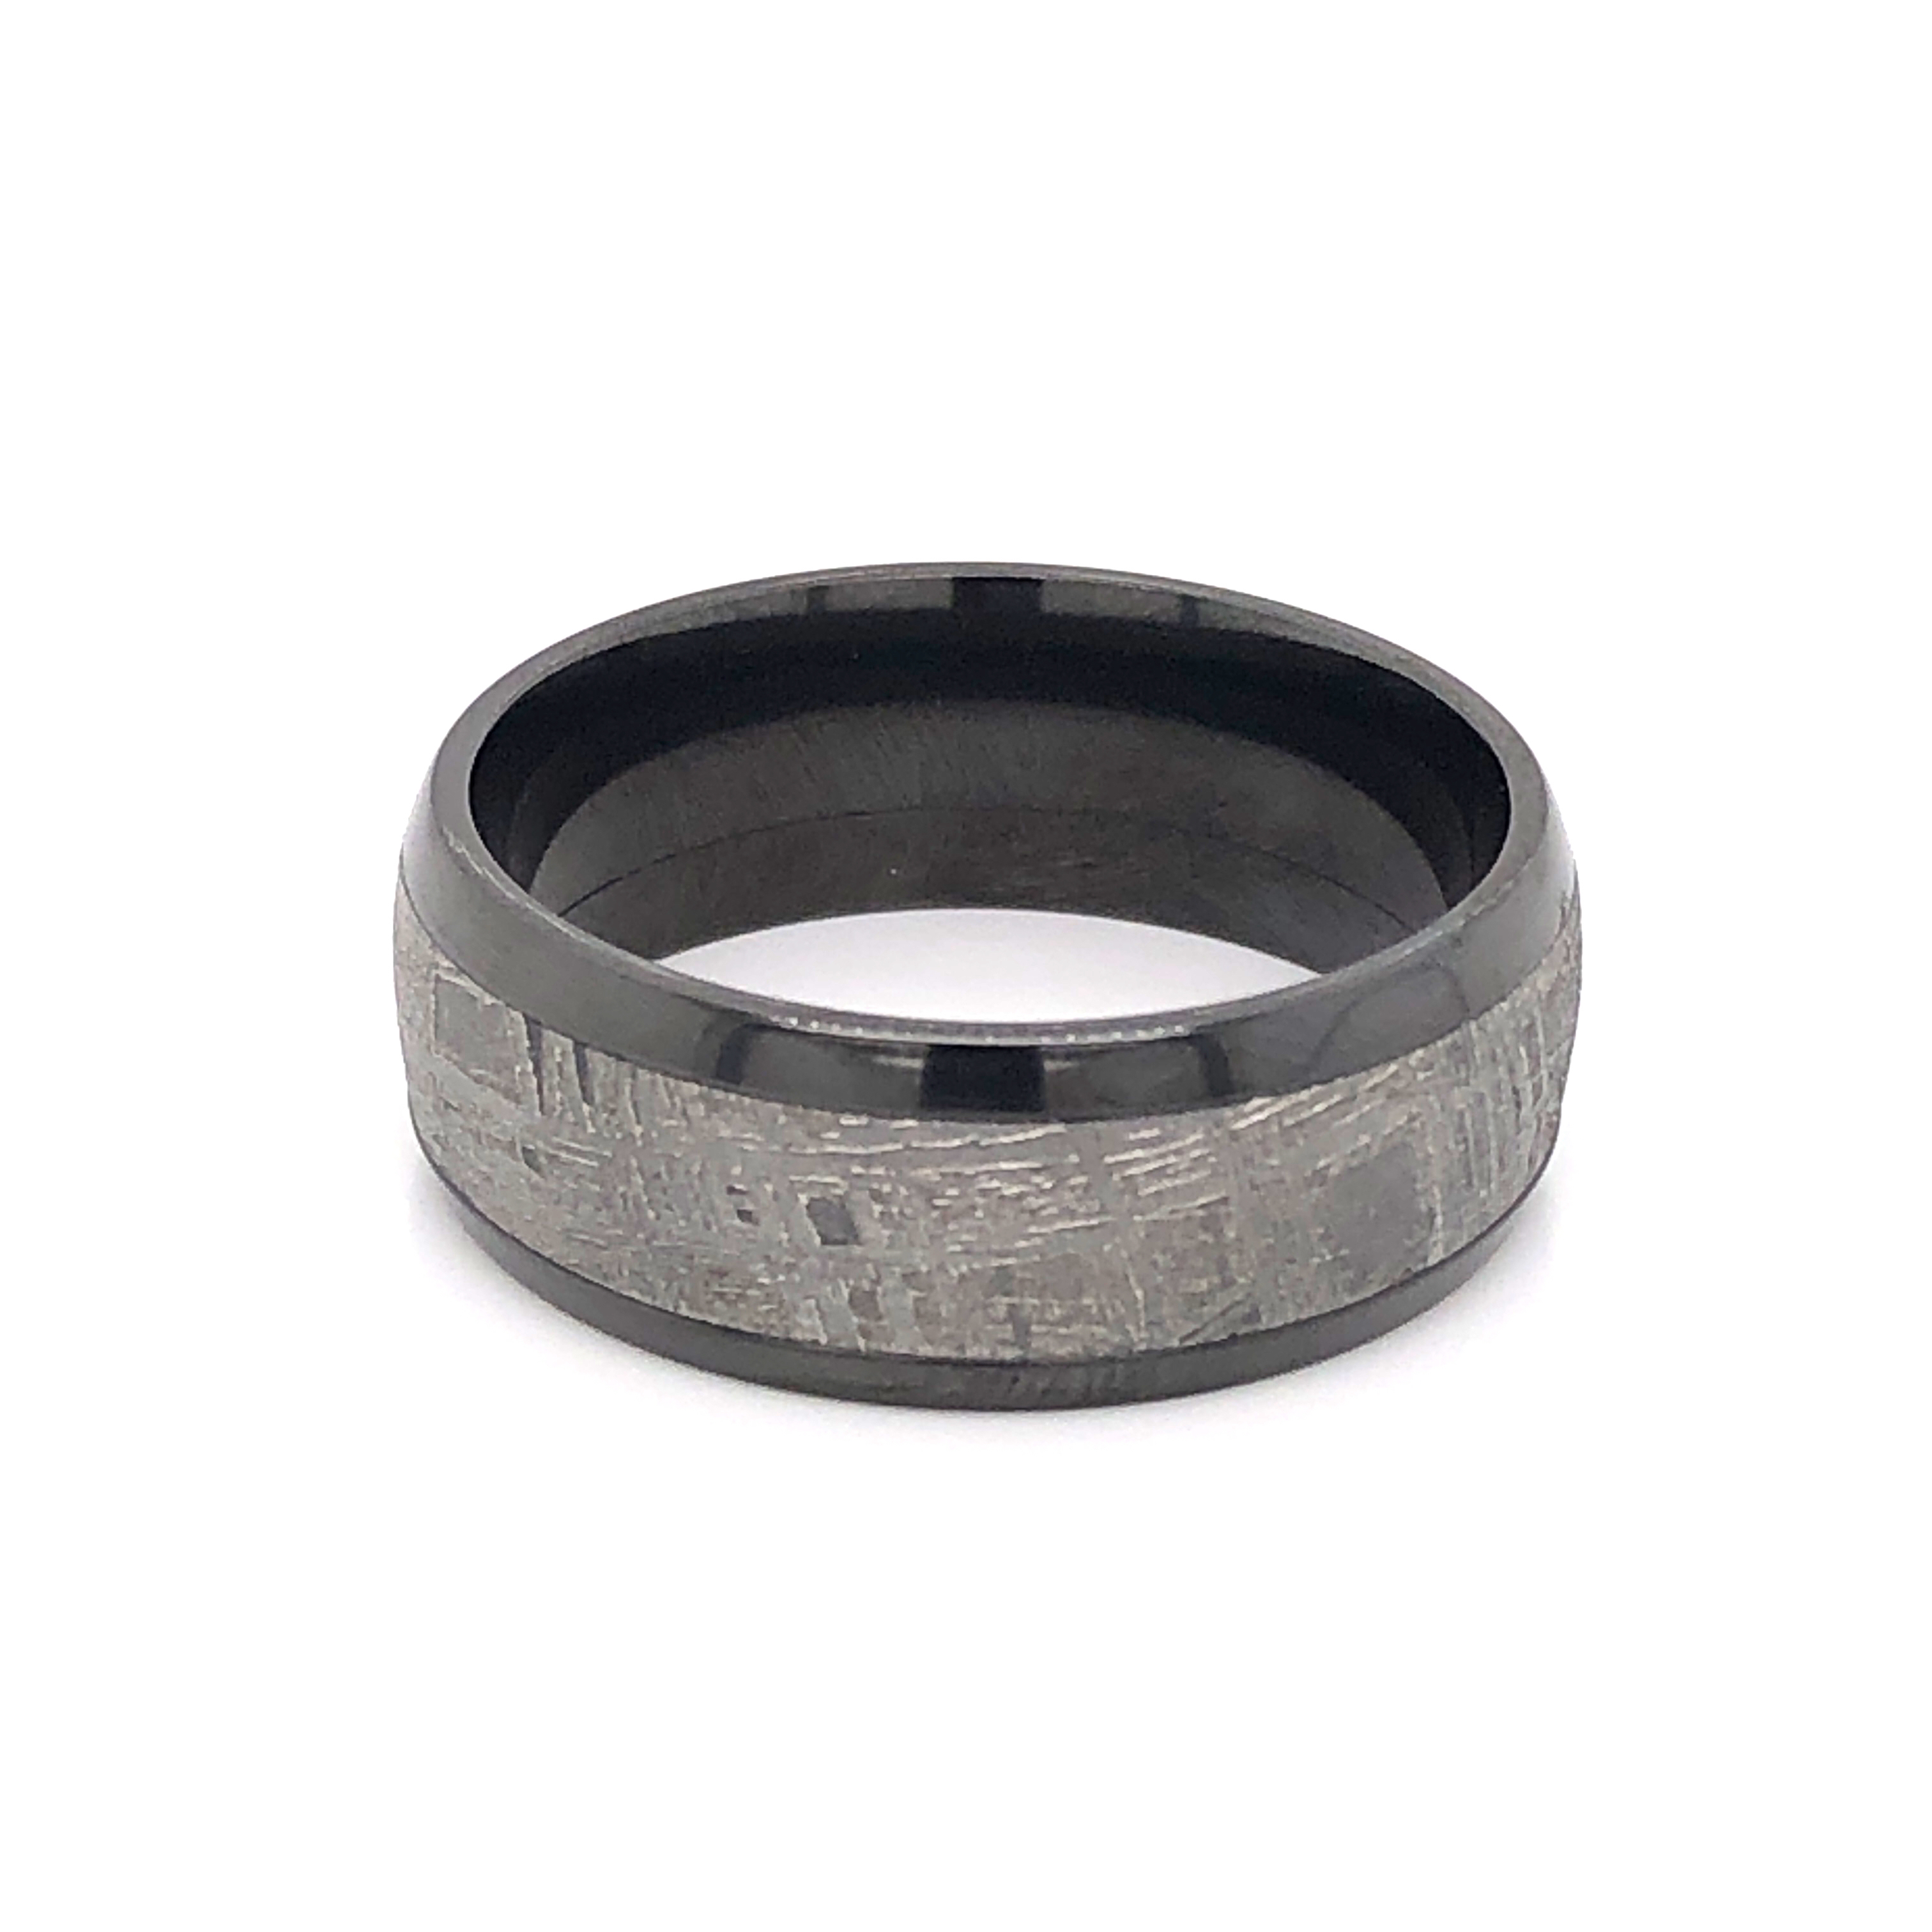 8mm wide domed Zirconium band with one 5mm centered inlay of meteorite.